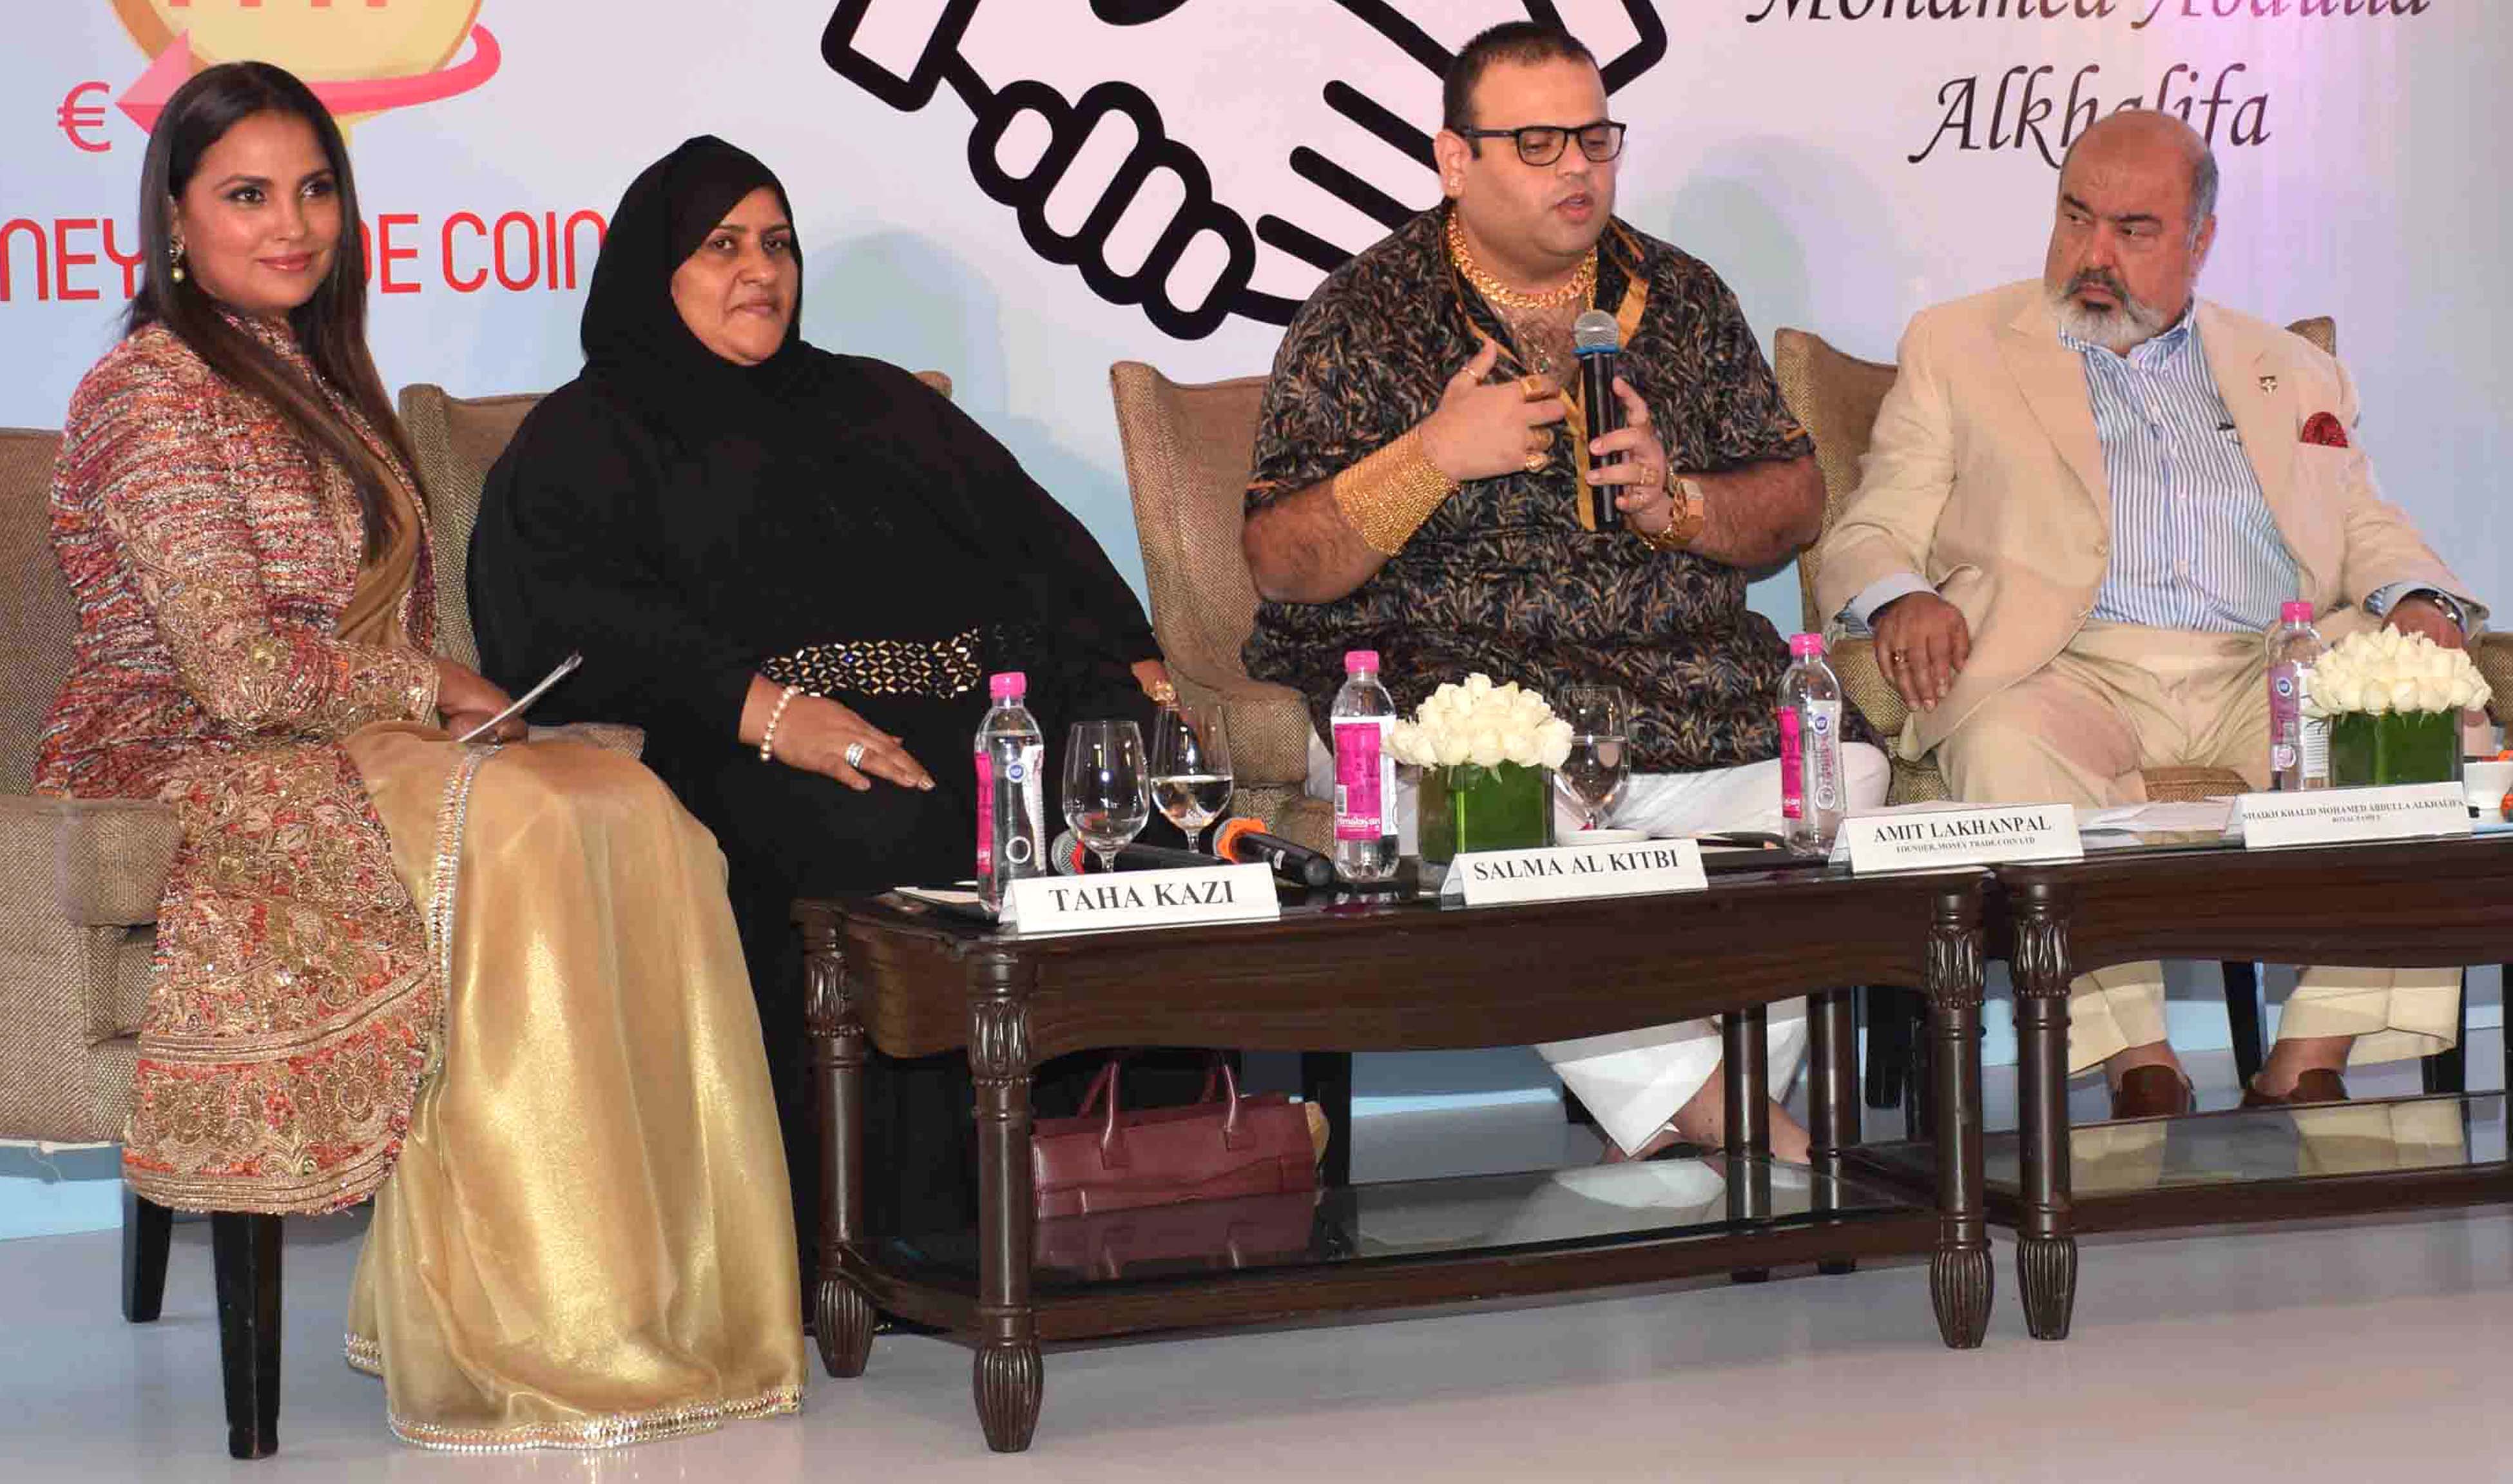 Mumbai , From Left: Bollywood Actress Lara Dutta,UAE Businesswoman &  Associated with Royal Family of Bahrain Mrs. Salma Al Kitbi Money Trade Coin's Founder & CEO  Amit Lakhanpal, Royal Family of Bahrain, H.E Shaikh Dr.Khalid Mohammed Al Khalifa and  during announcement the listing of Mony Trade Coin, a new cryptocurrency designed to accommodate  wide range of fiinancial transactions & Investment in Mumbai on Wednesday. Photo By Sachin Murdeshwar GPN NETWORK on18.10.2017